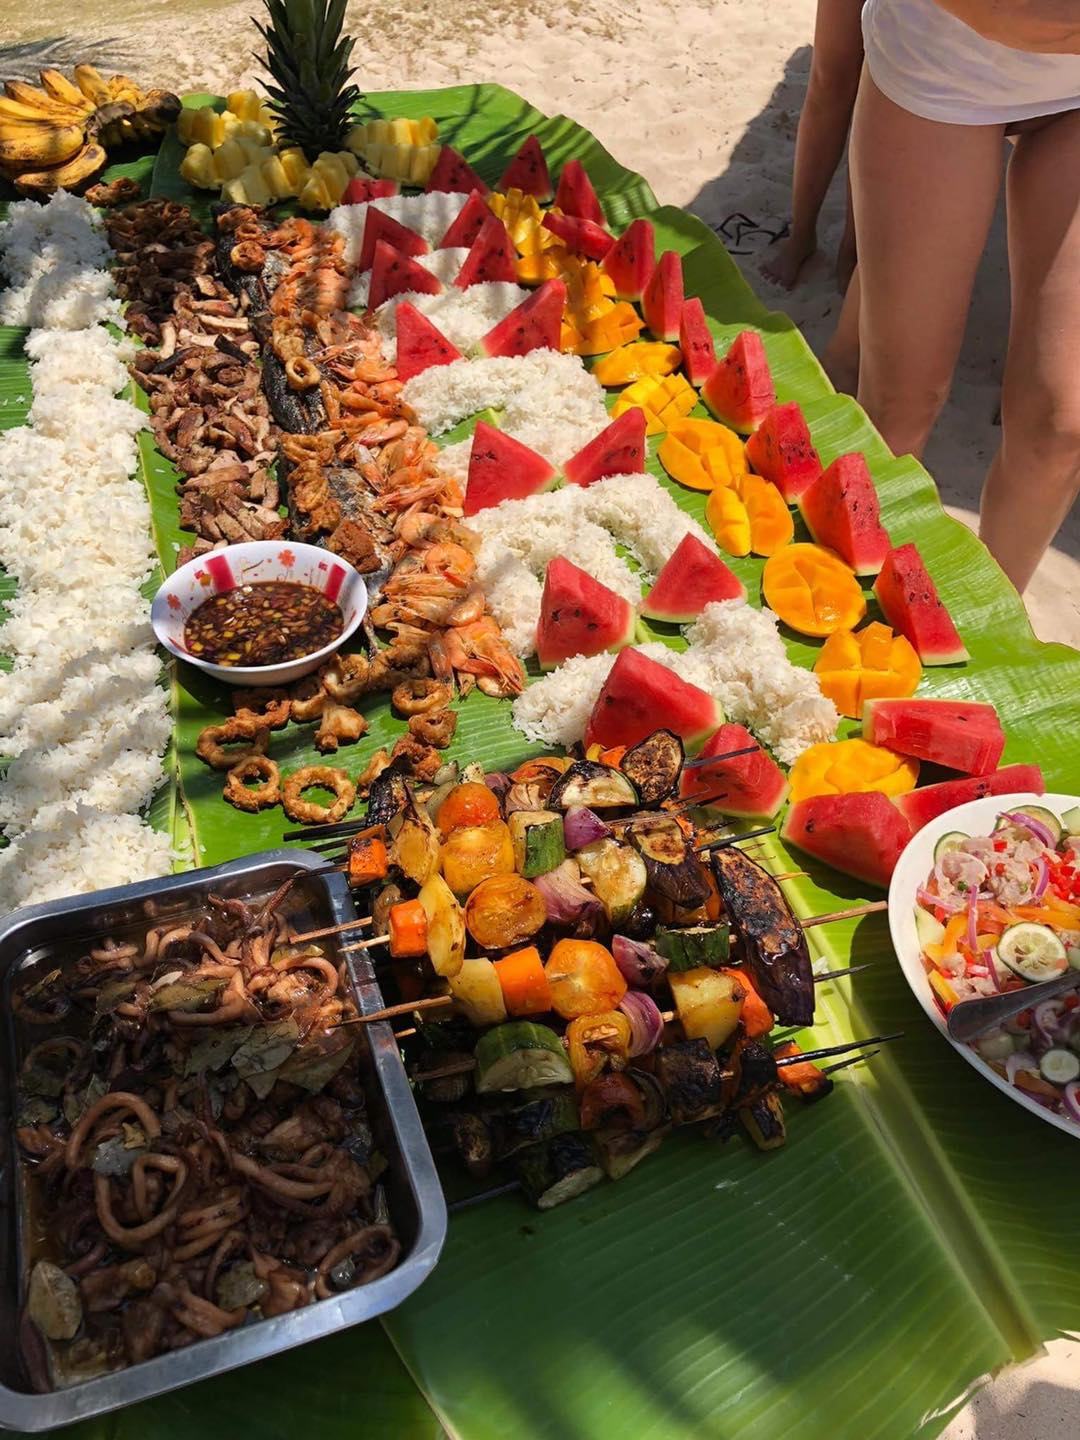 2023 Guide: 8 Must-Try Eats in Siargao